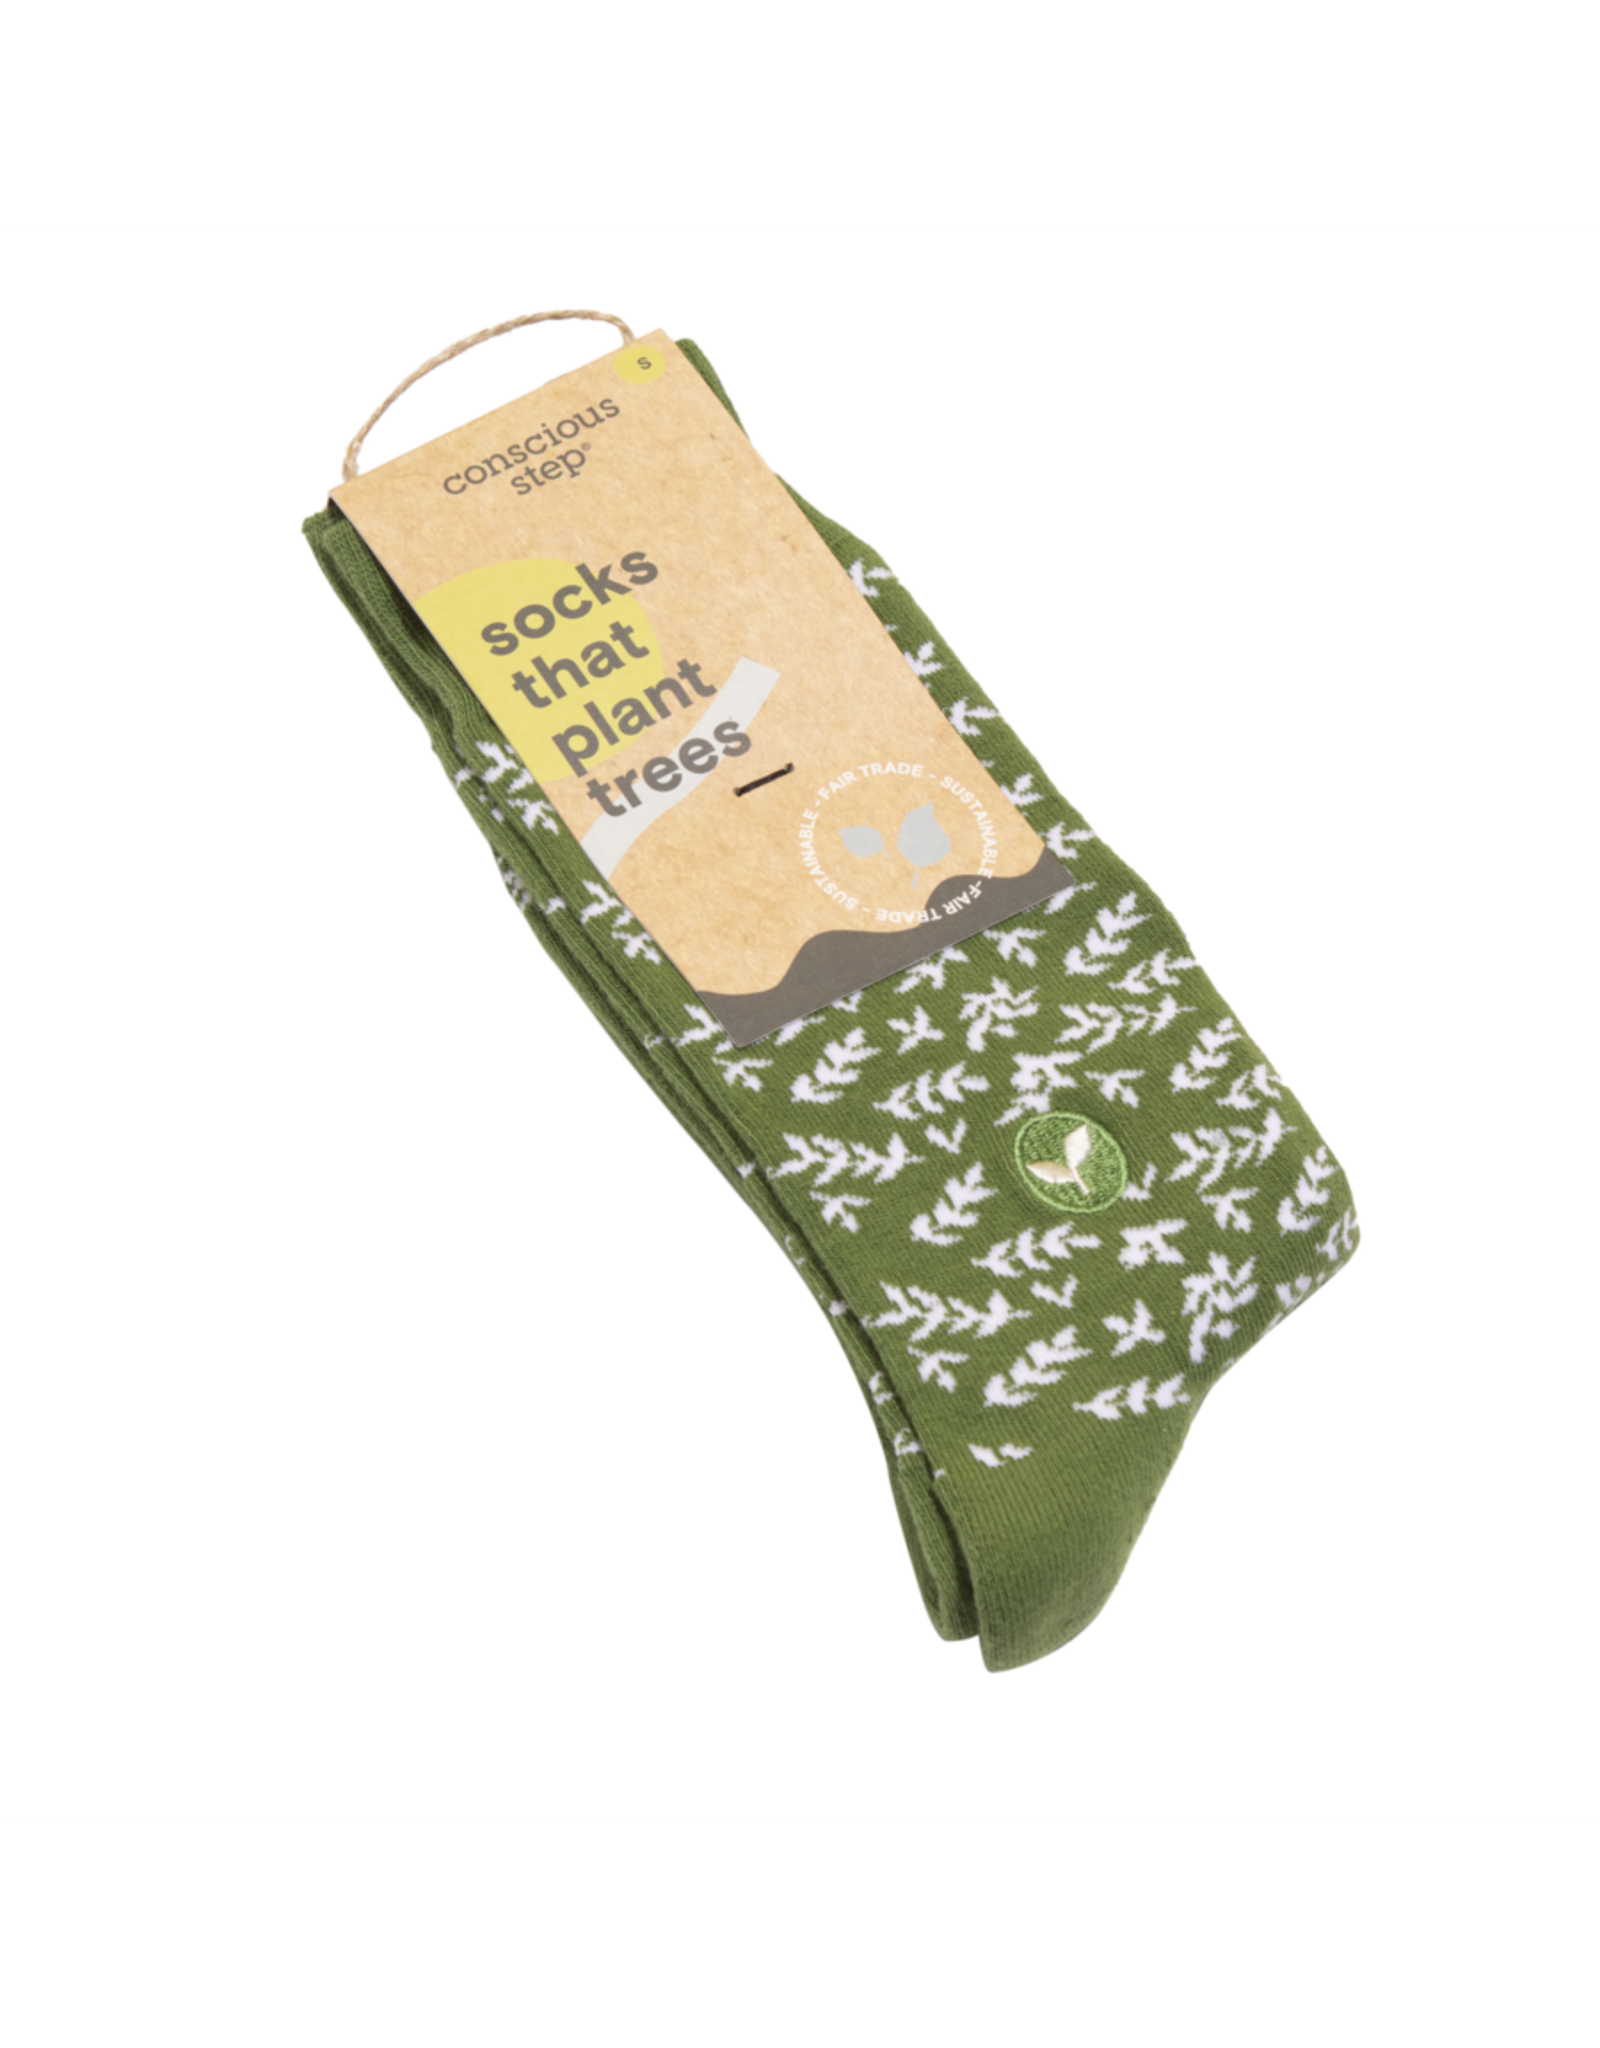 Trade roots Socks that Plant Trees, Bright Green